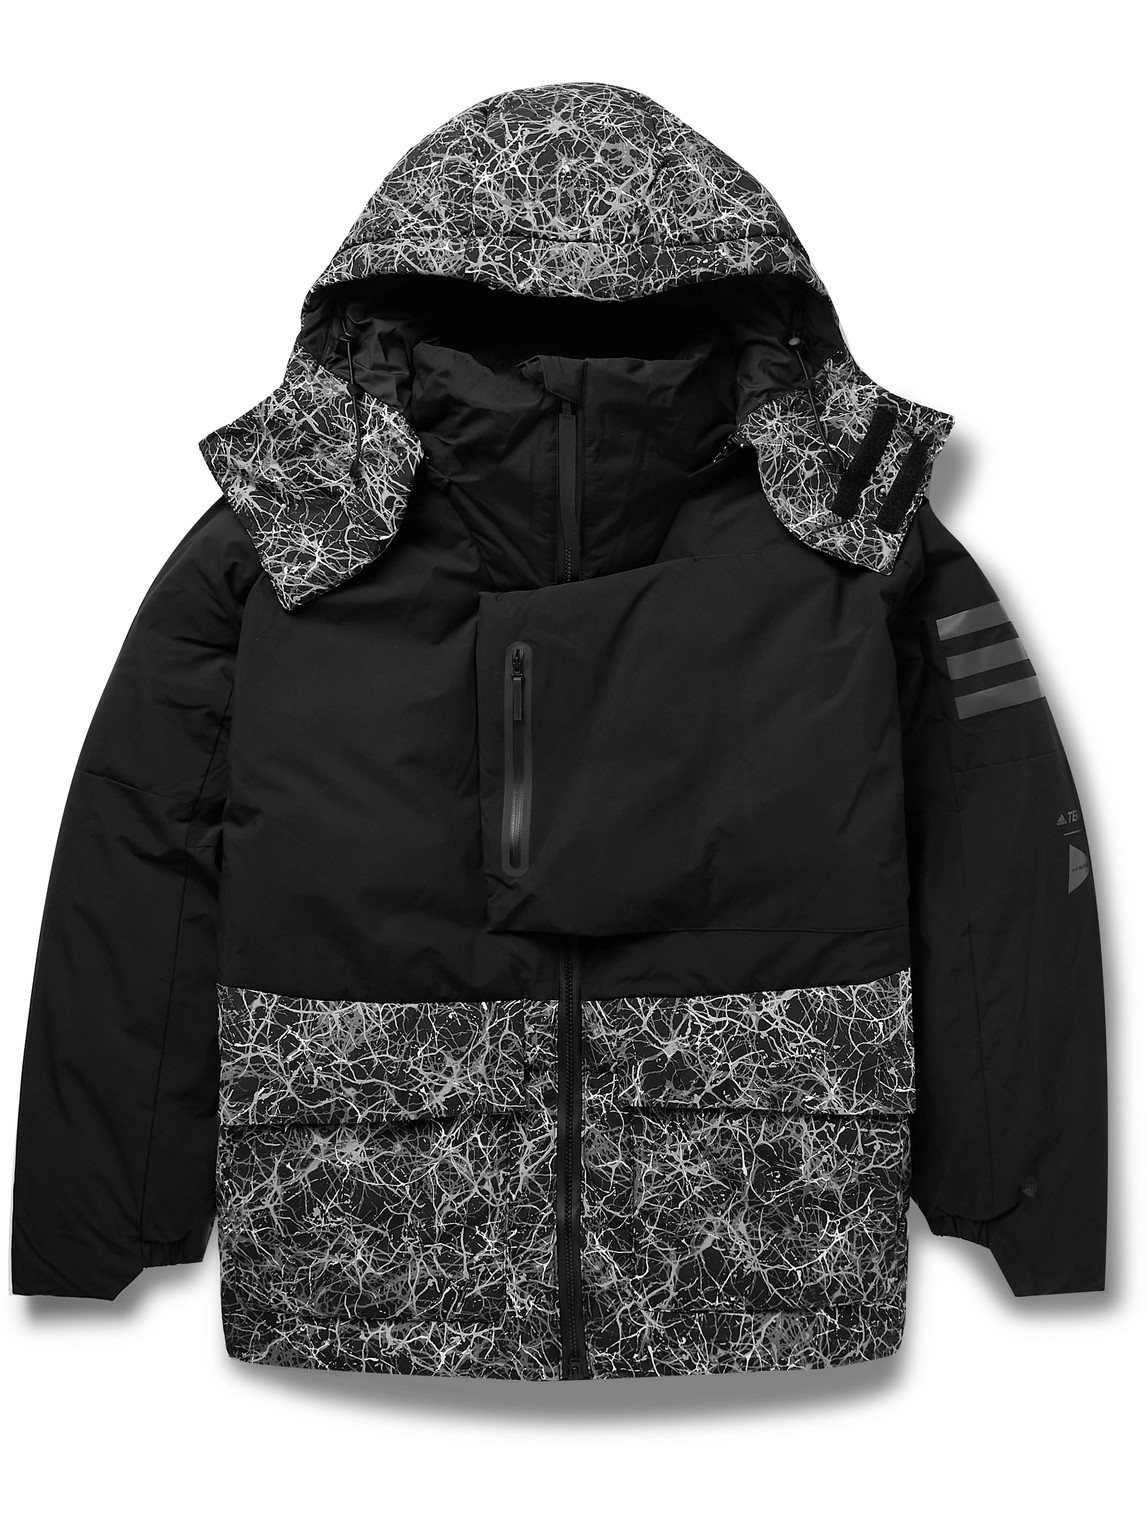 Adidas Consortium And Wander Terrex Printed Shell Hooded Down Jacket In Black